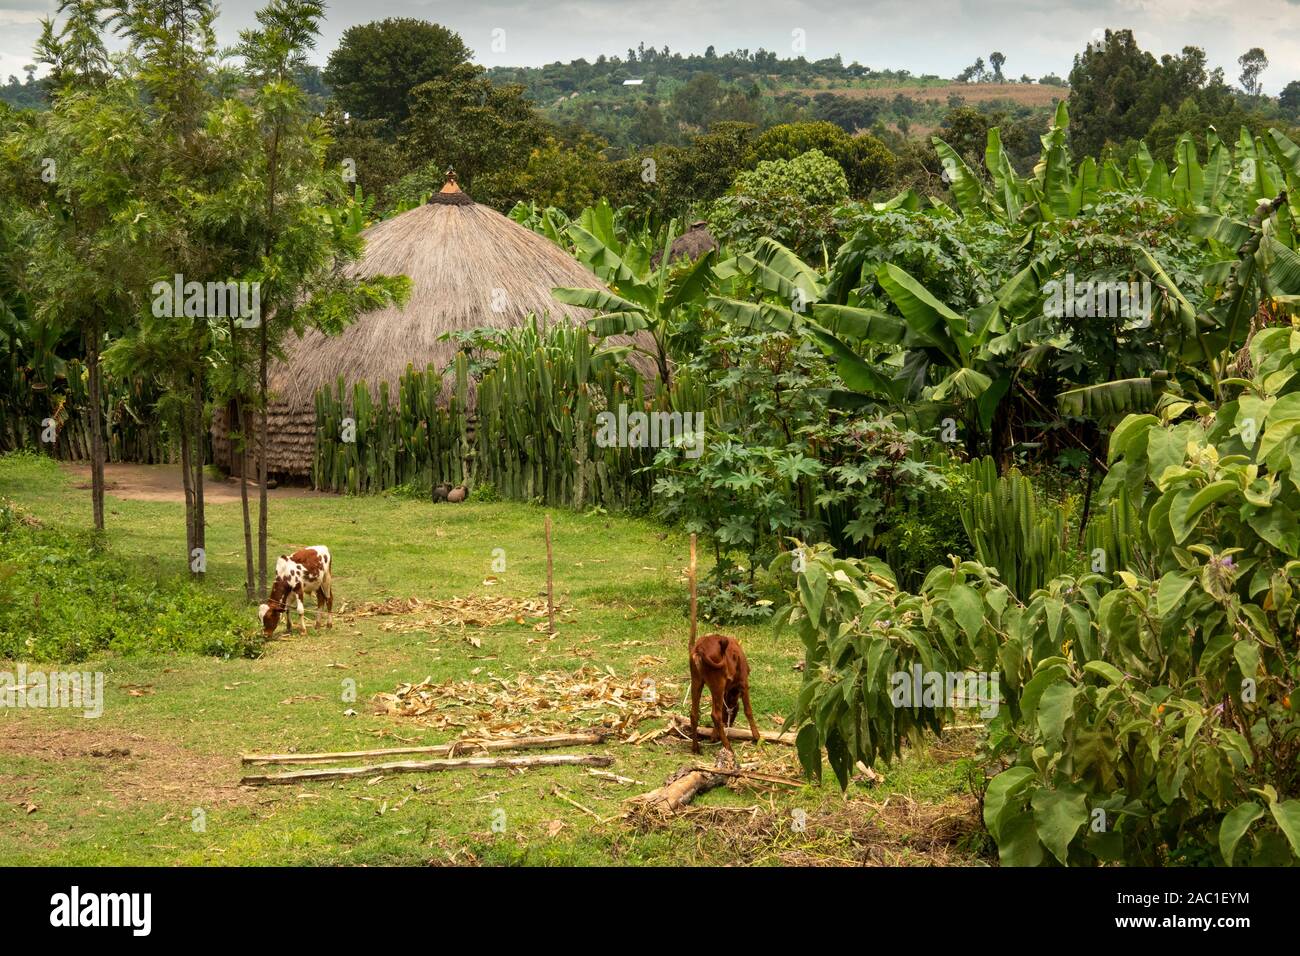 Ethiopia, Rift Valley, Awasa (Hawassa), Koran Gorge, traditional house in small agricultural settlement Stock Photo